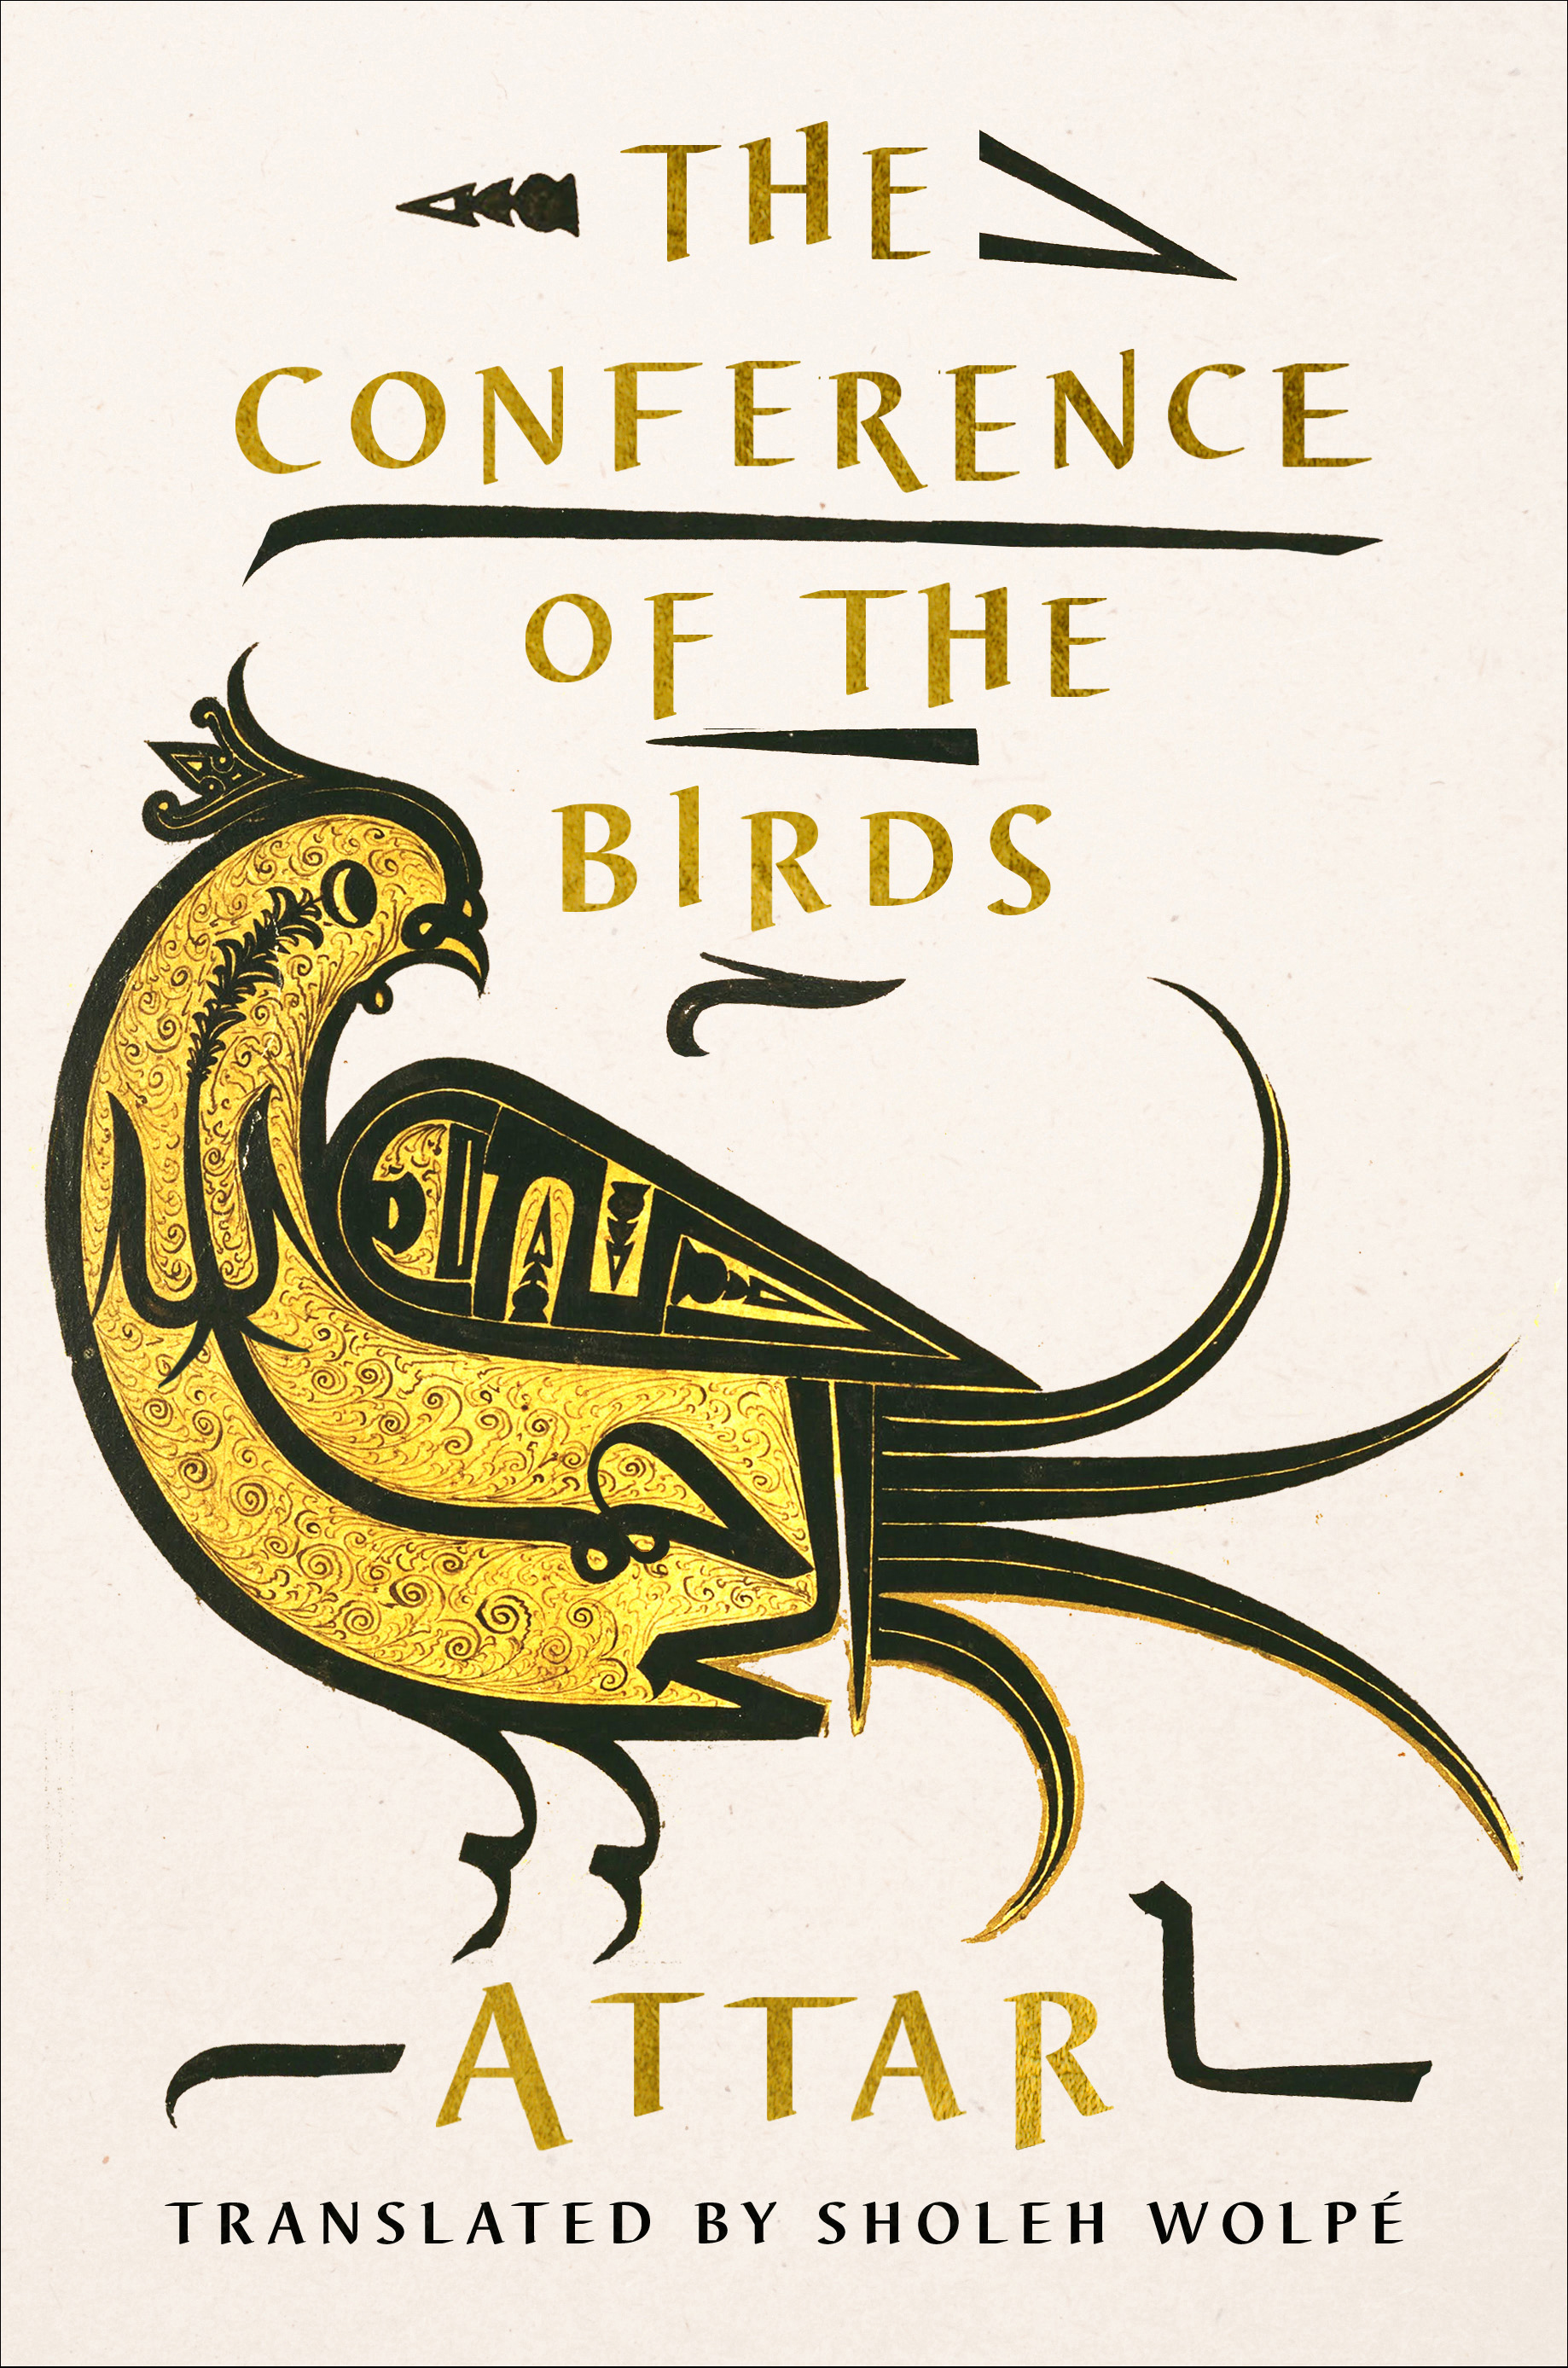 cover of Sholeh Wolpe's translation of "The Conference of the Birds"